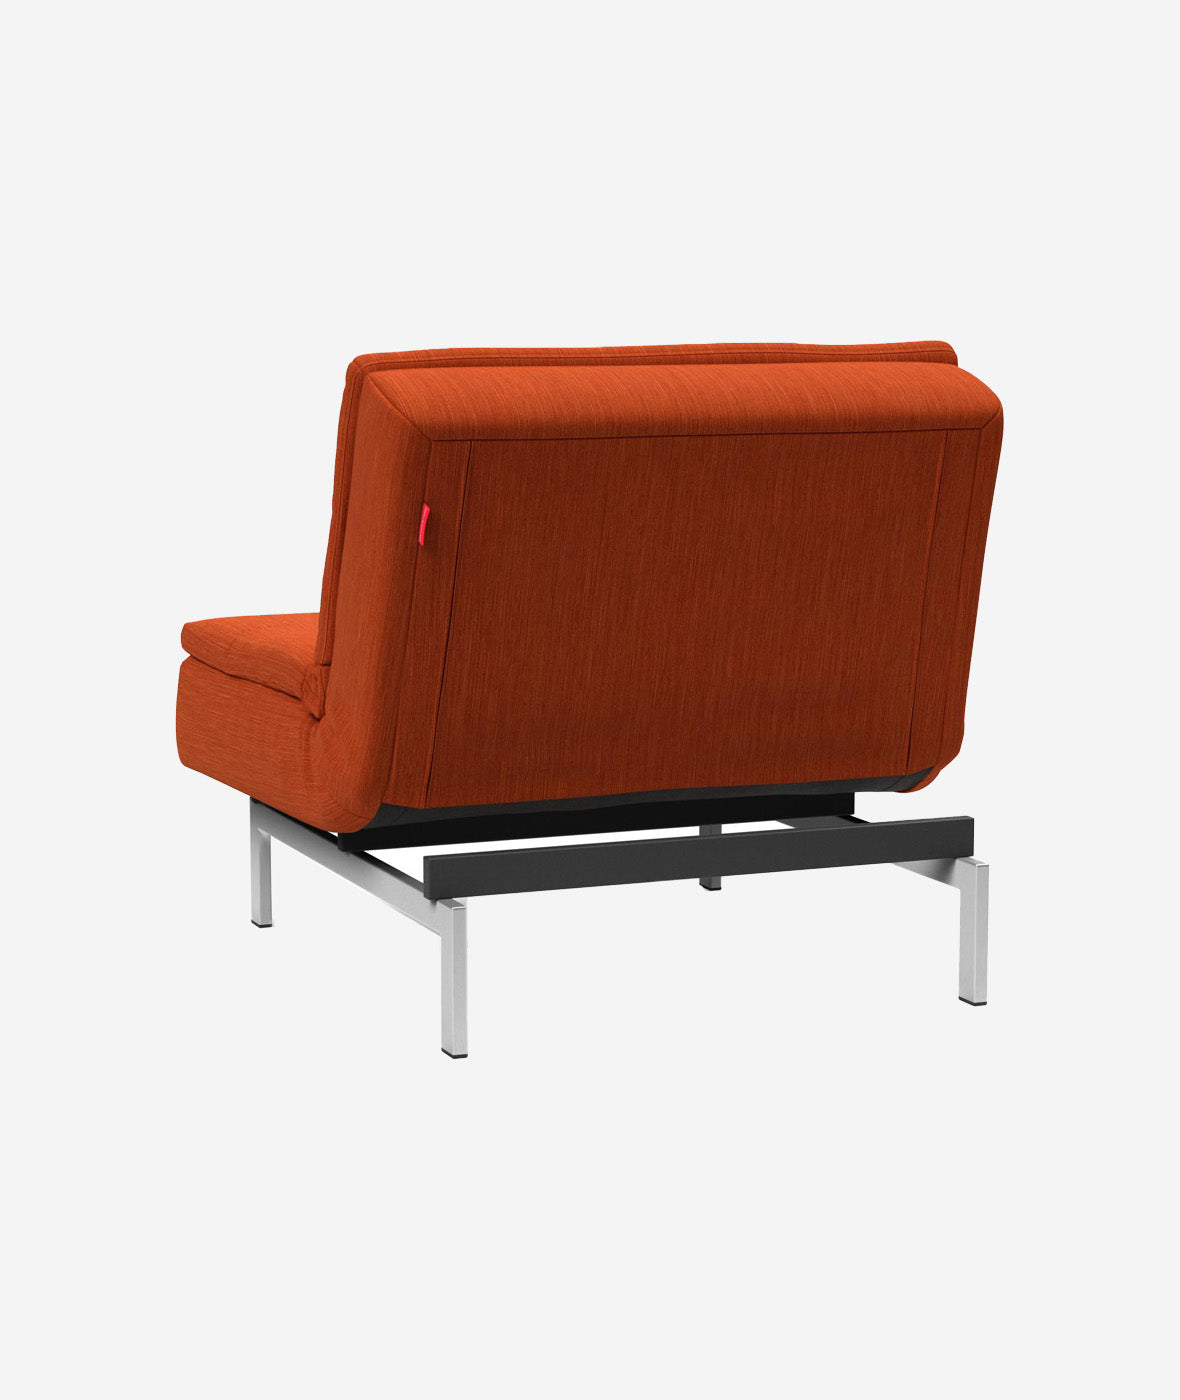 Dublexo Deluxe Chair - More Options